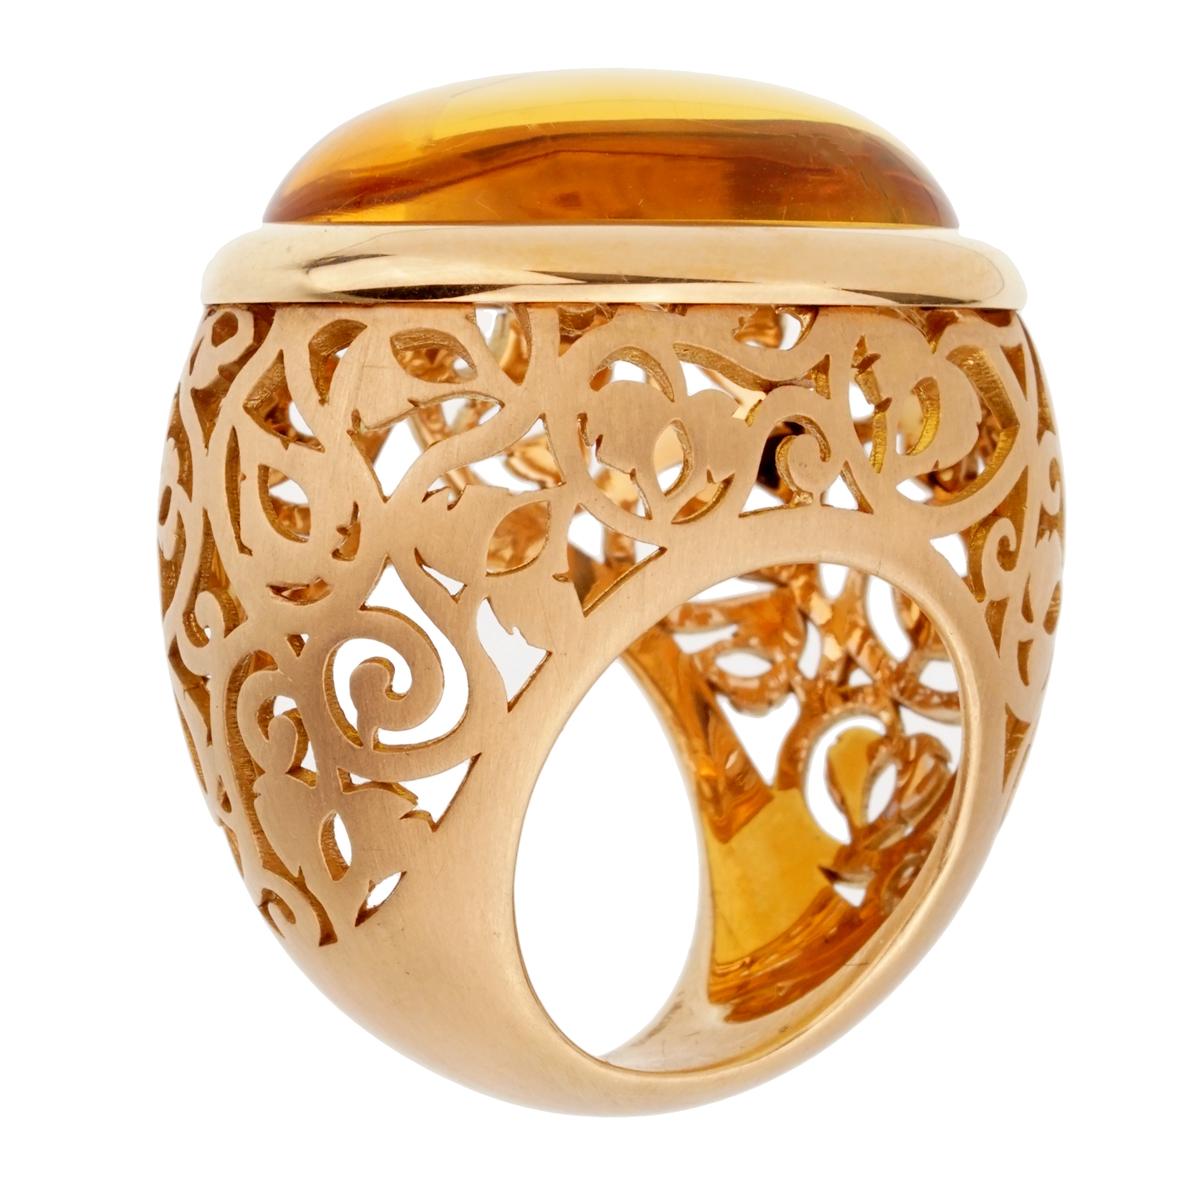 A magnificent brand new Pomellato rose gold cocktail ring showcasing a 19.94ct cabochon Amber. The ring measures a size 5.5 and can be resized.

Pomellato Retail Price: $7,800
Sku: 2320